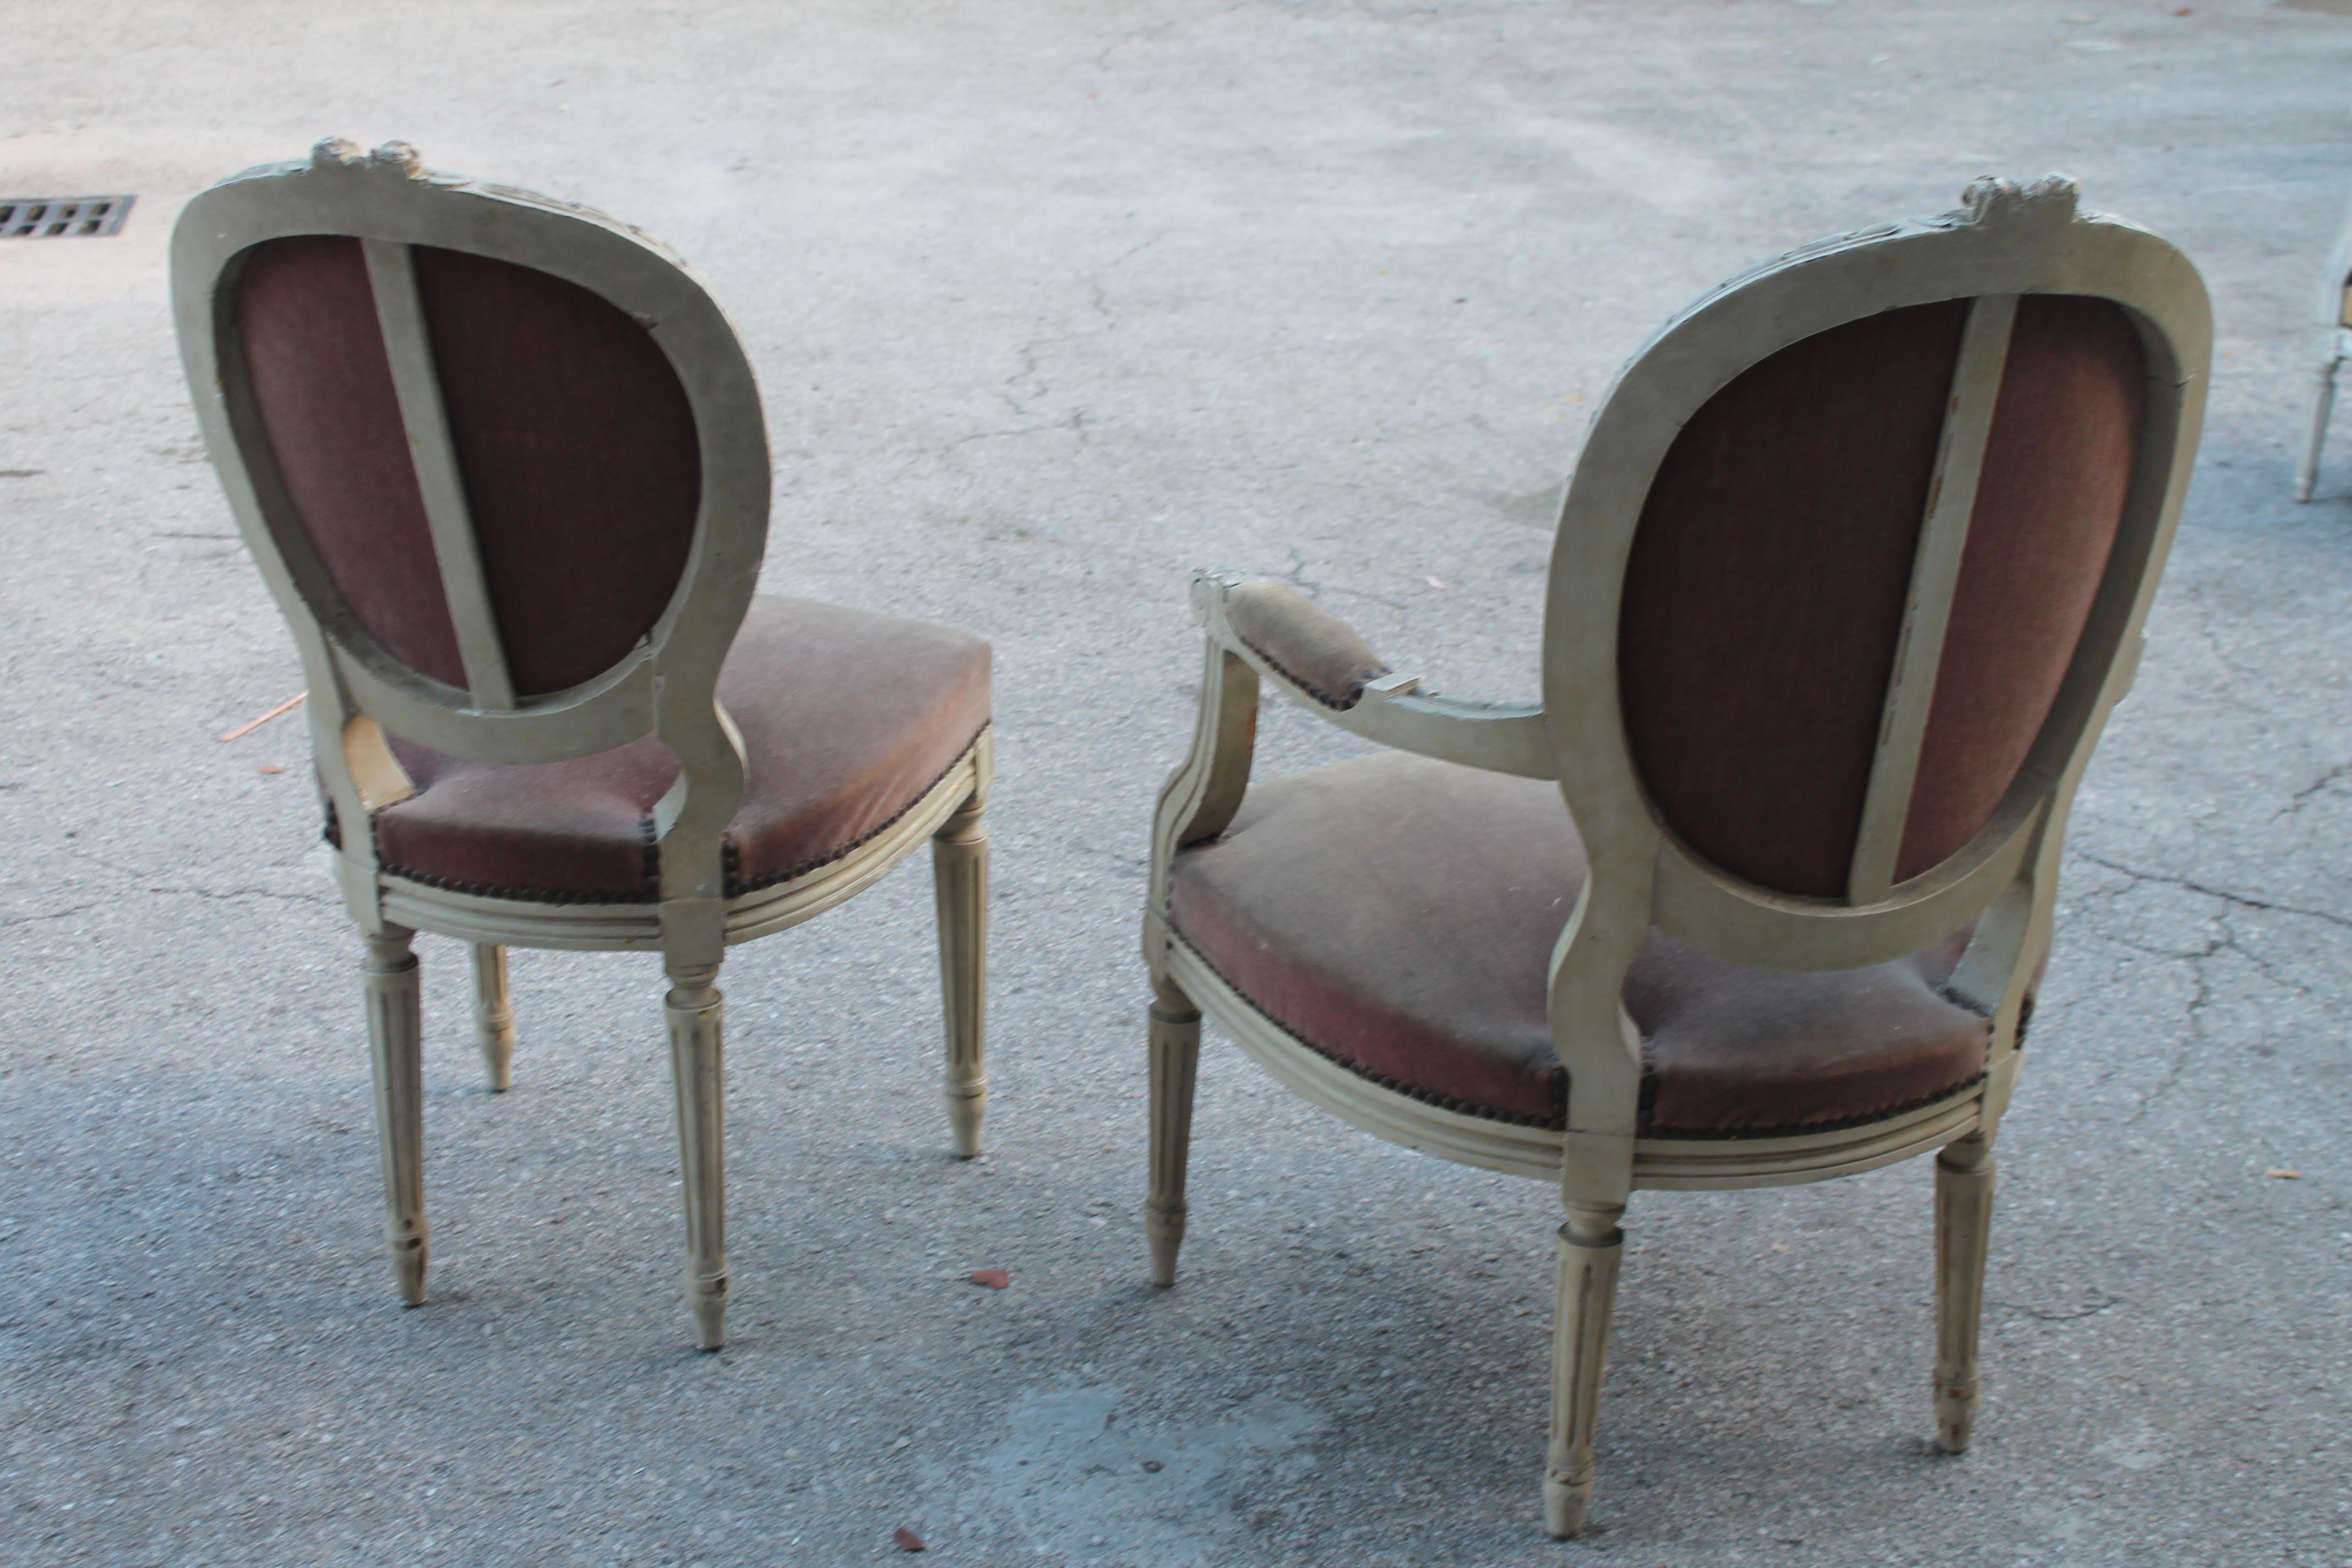  19thc French Louis XVI Arm Chair and Side Chair [2 piece] For Sale 3